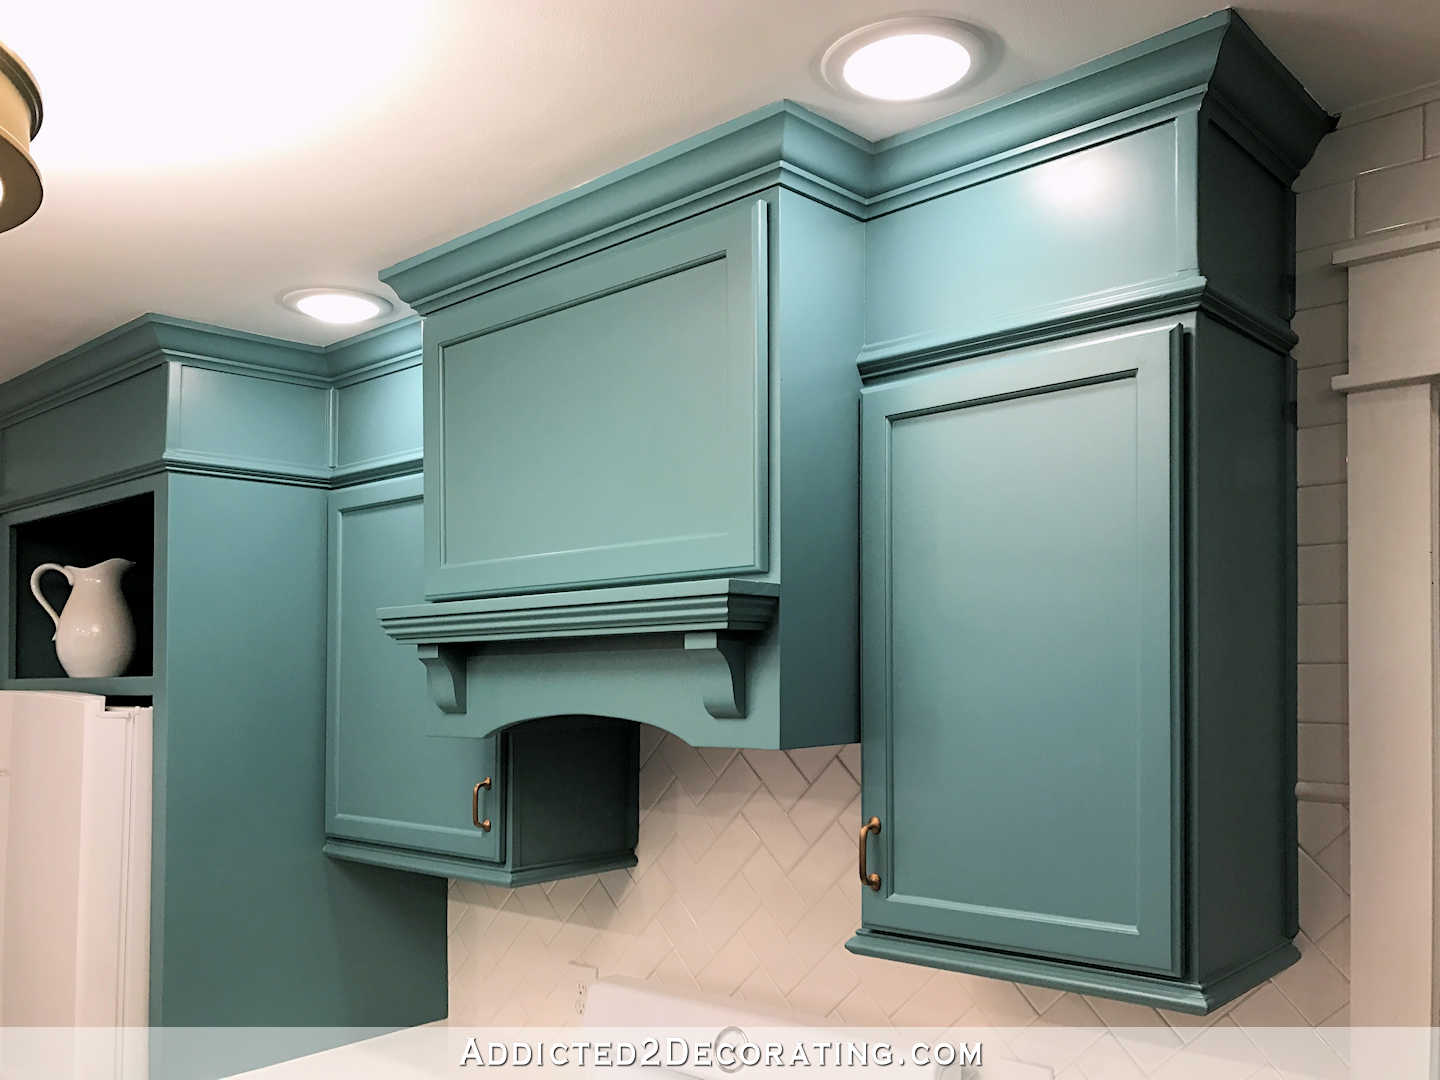 how to build a custom wood range hood cover - 33 - install cabinet door to cover the opening